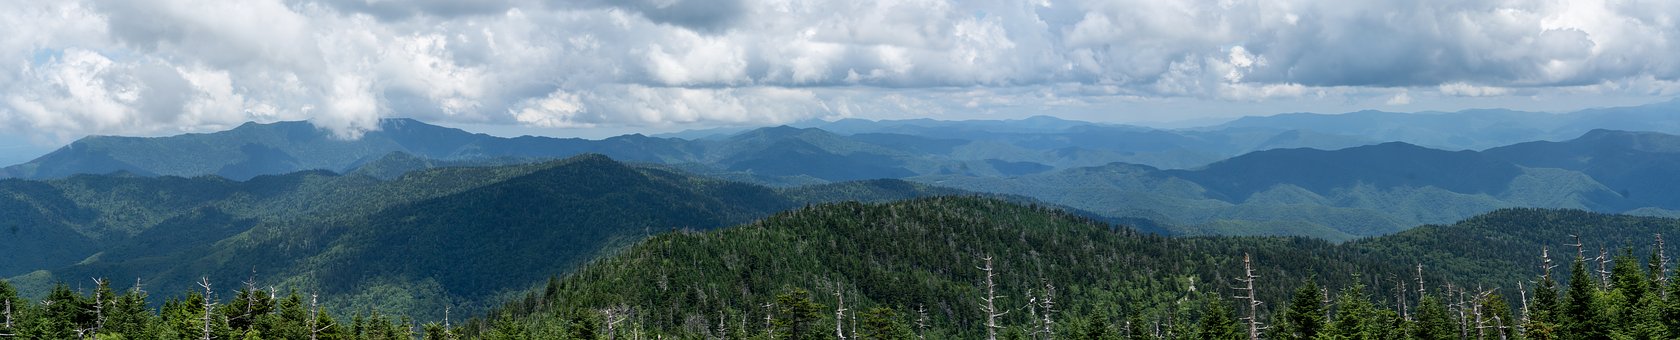 Smoky Mountains, Mountains, Panorama - Spruce-fir Forest , HD Wallpaper & Backgrounds